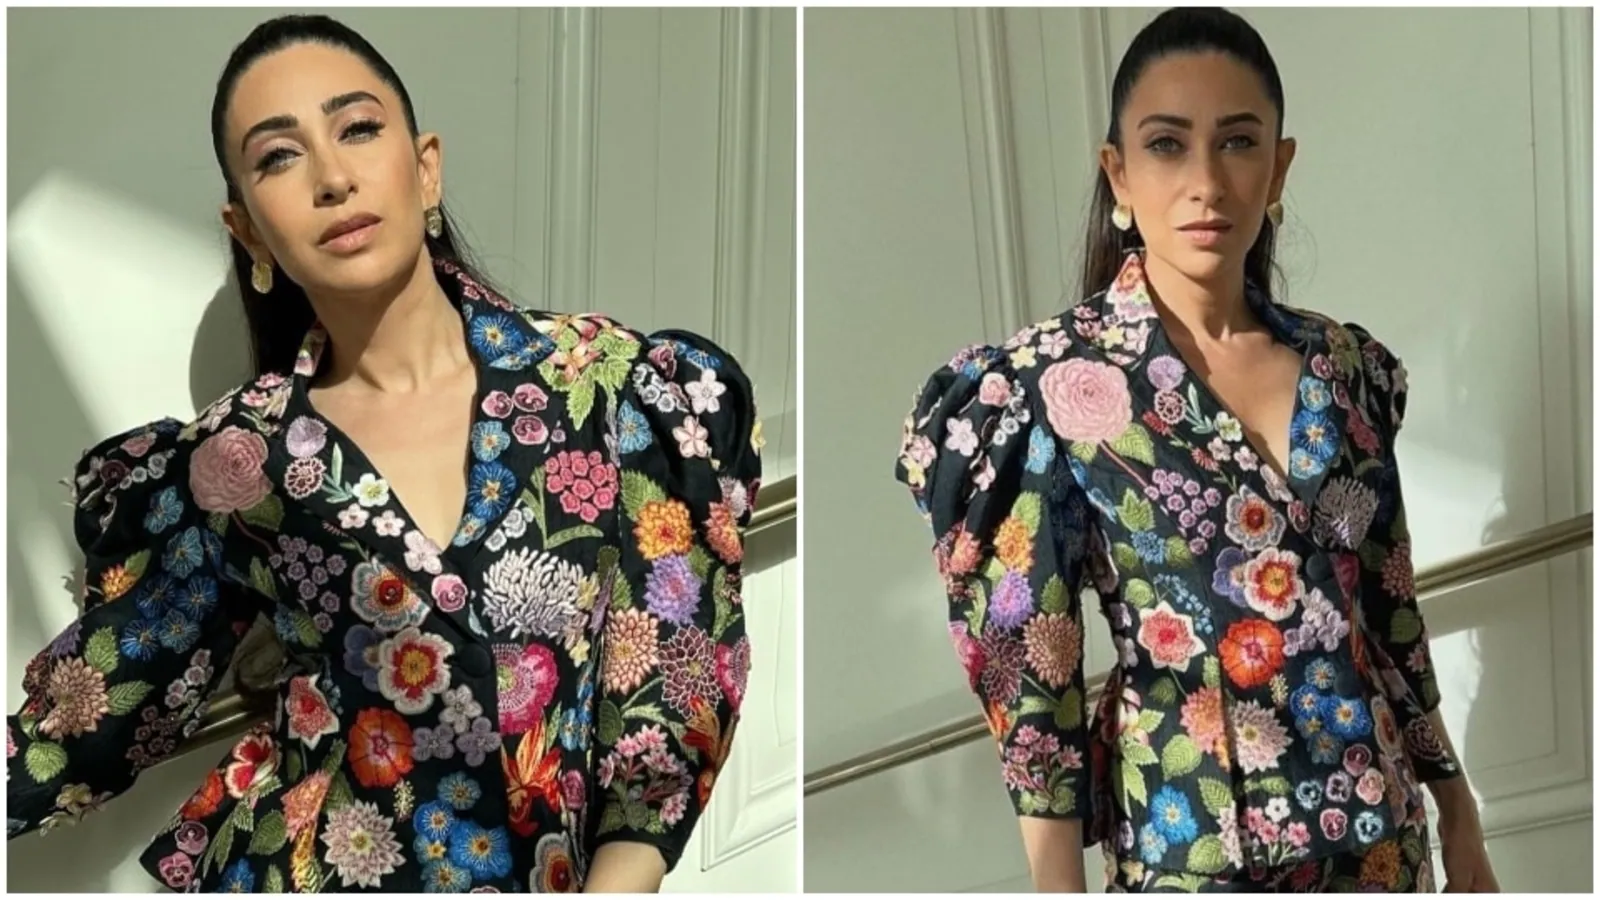 Karisma Kapoor is all about ‘staying wild’ in quirky floral blazer and pants set for photoshoot in Dubai: Check out pics